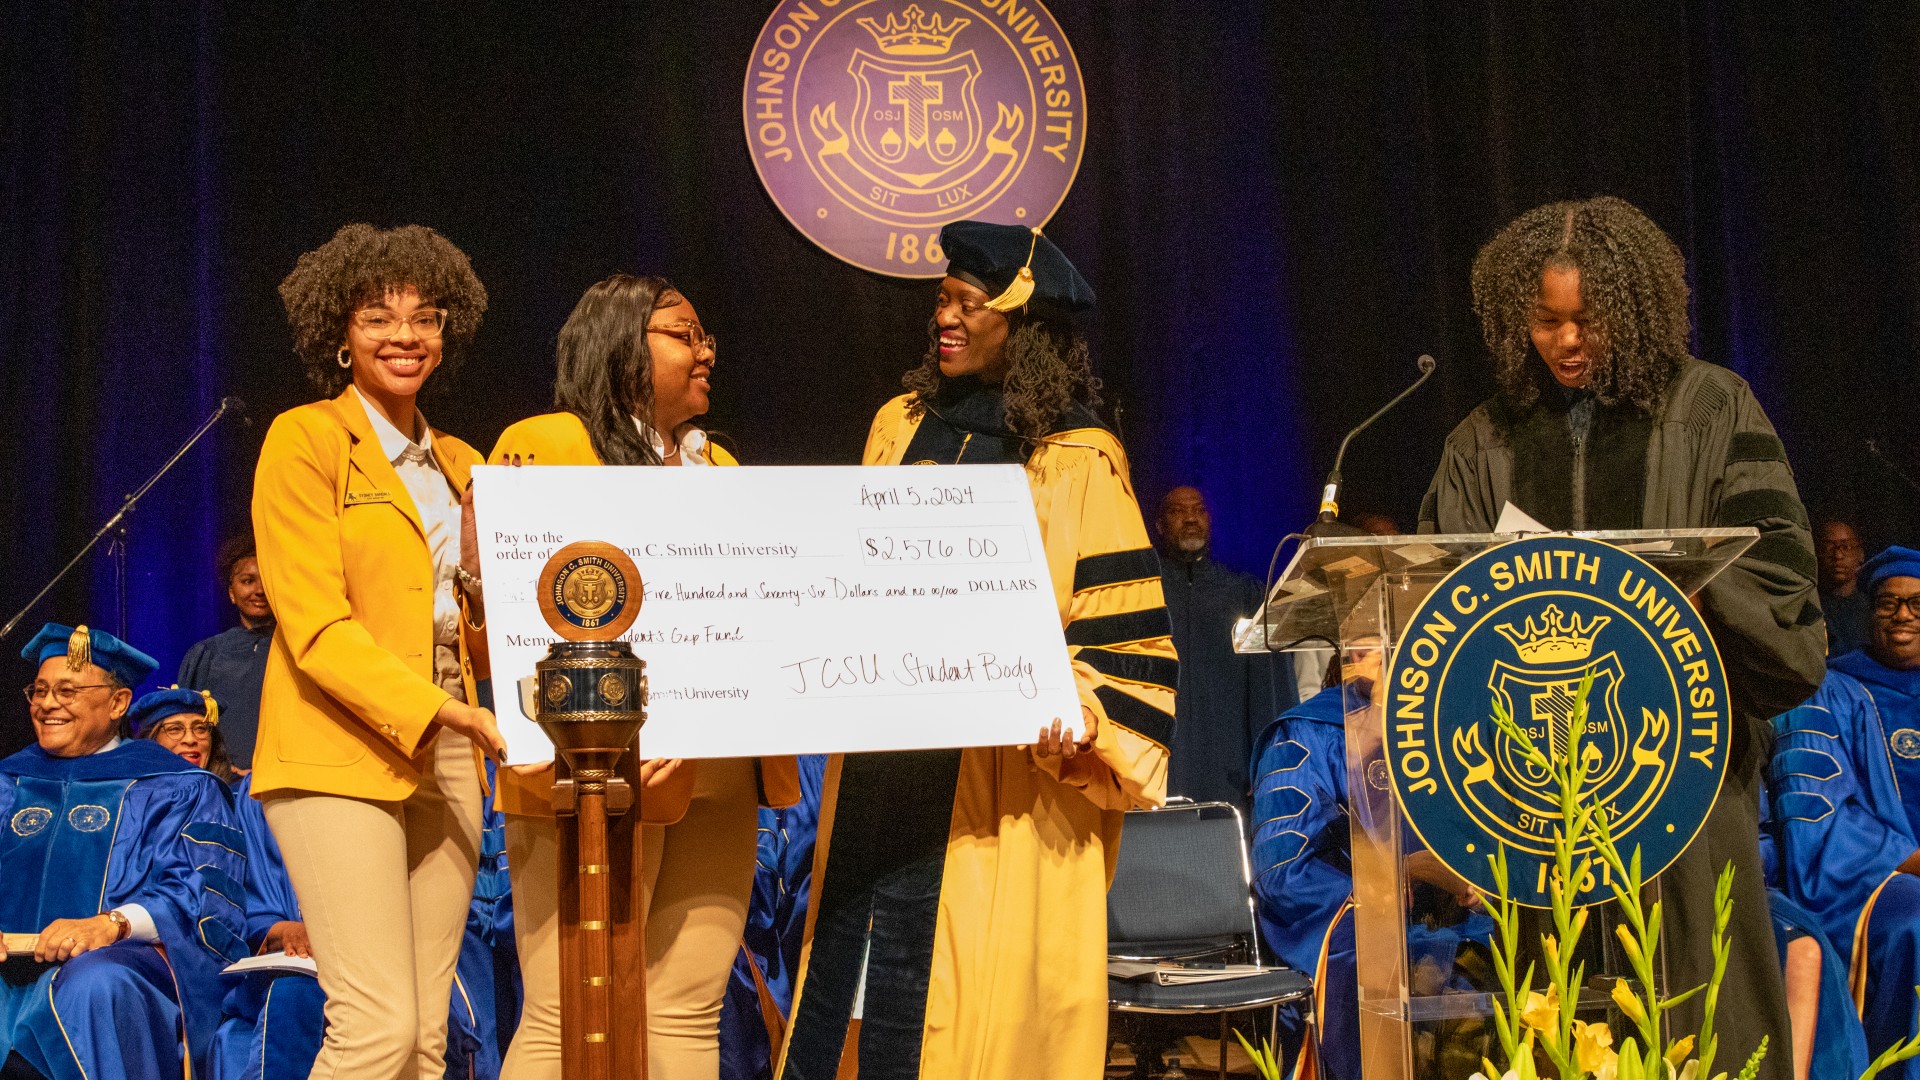 The JCSu Student Body presents a check to Dr. Kinloch during her inauguration